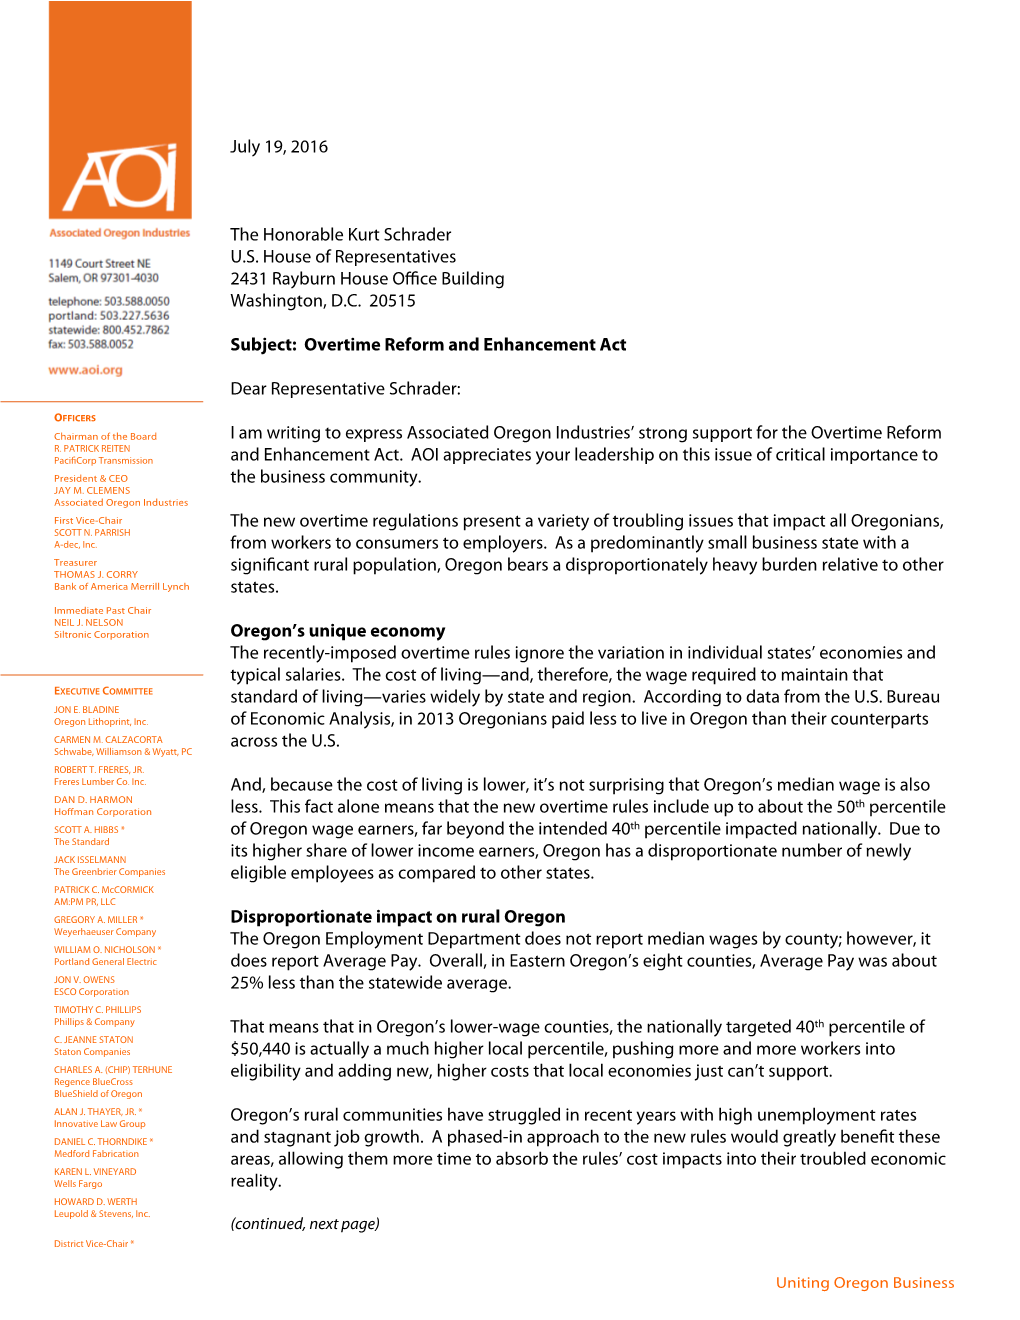 Associated Oregon Industries Re: Overtime Reform and Enhancement Act July 19, 2016 July 19, 2016 Page 2